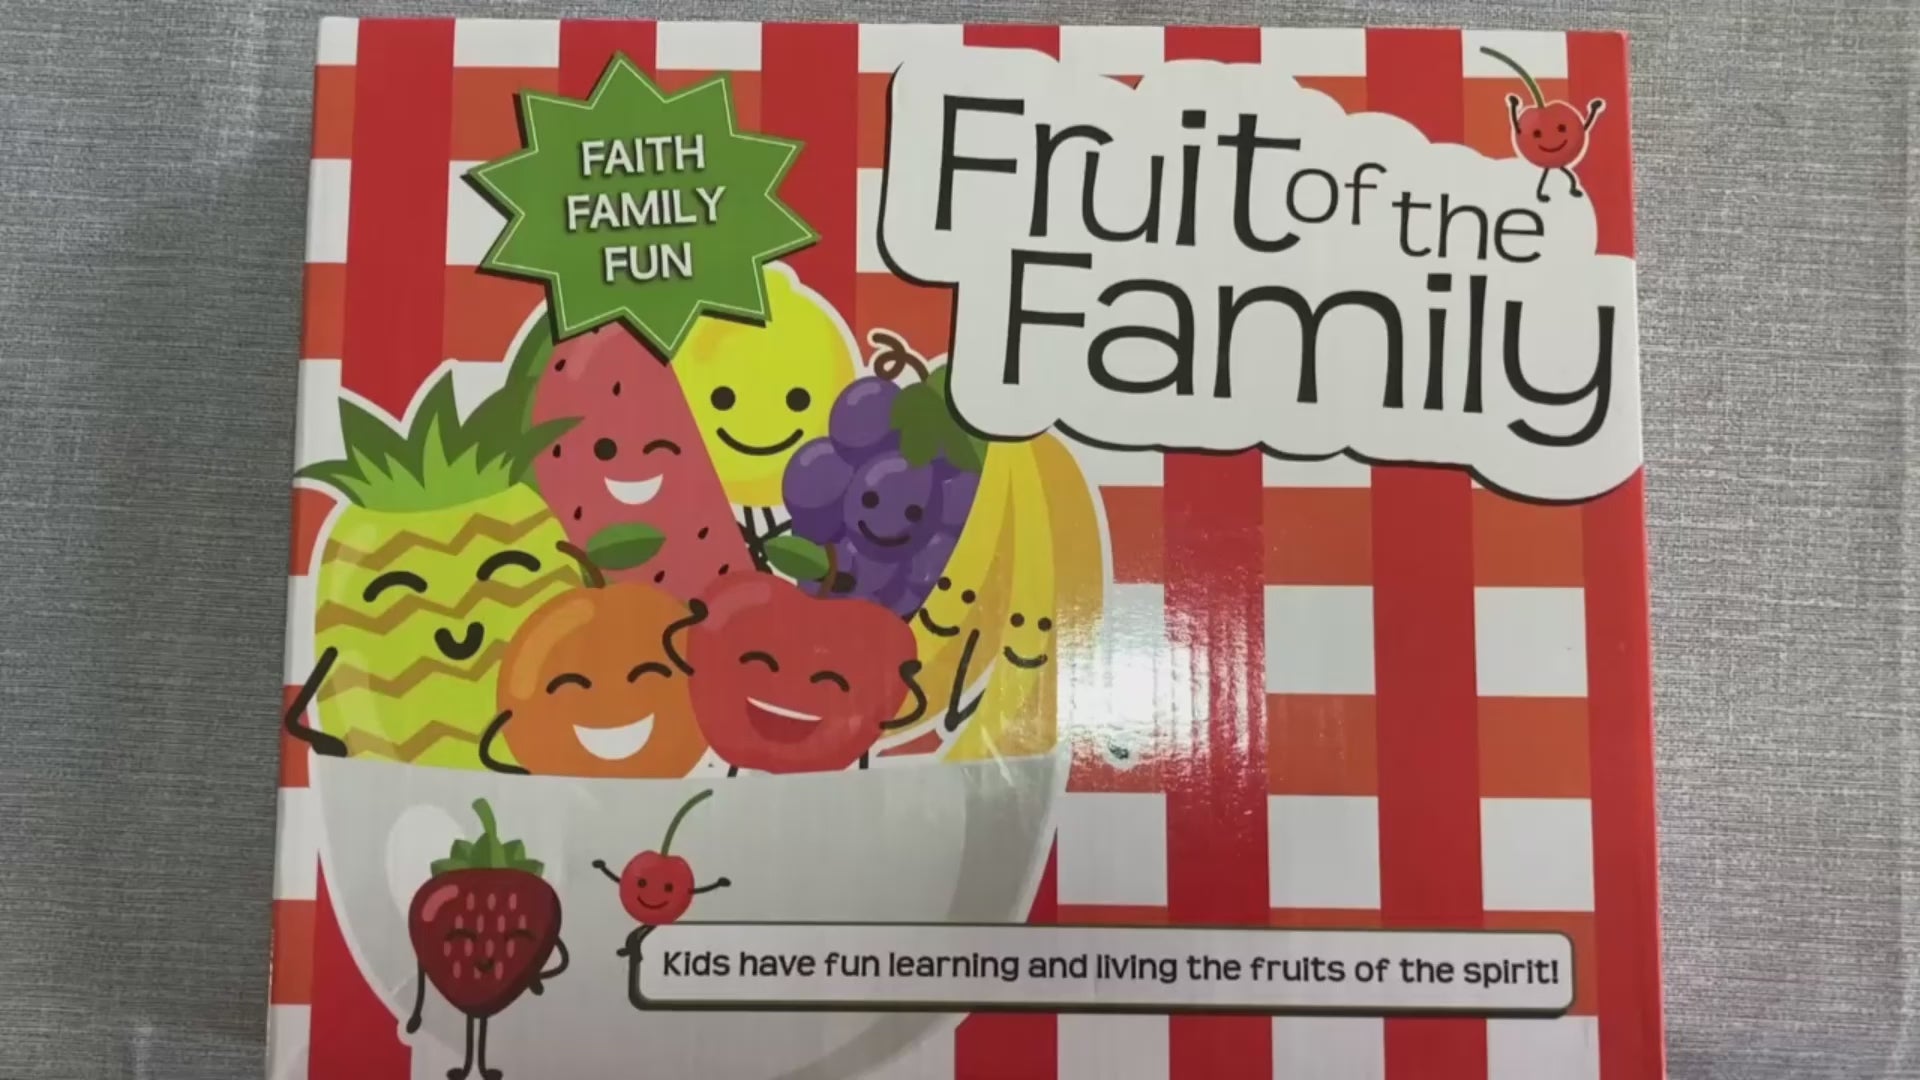 Load video: Video shows close-up of two hands opening a red and white checkered box with the title Fruit of the Family on the top. The box top has a bowl of smiling fruit with the words faith, family fun above it. The video shows the hands removing each piece of the game and showing the camera. Game pieces include 4 white cards with text, instruction booklet, 4 zippered bags with pictures of fruit bowl on them, and 9 boards of tokens with pictures of fruit on them to be popped out. 